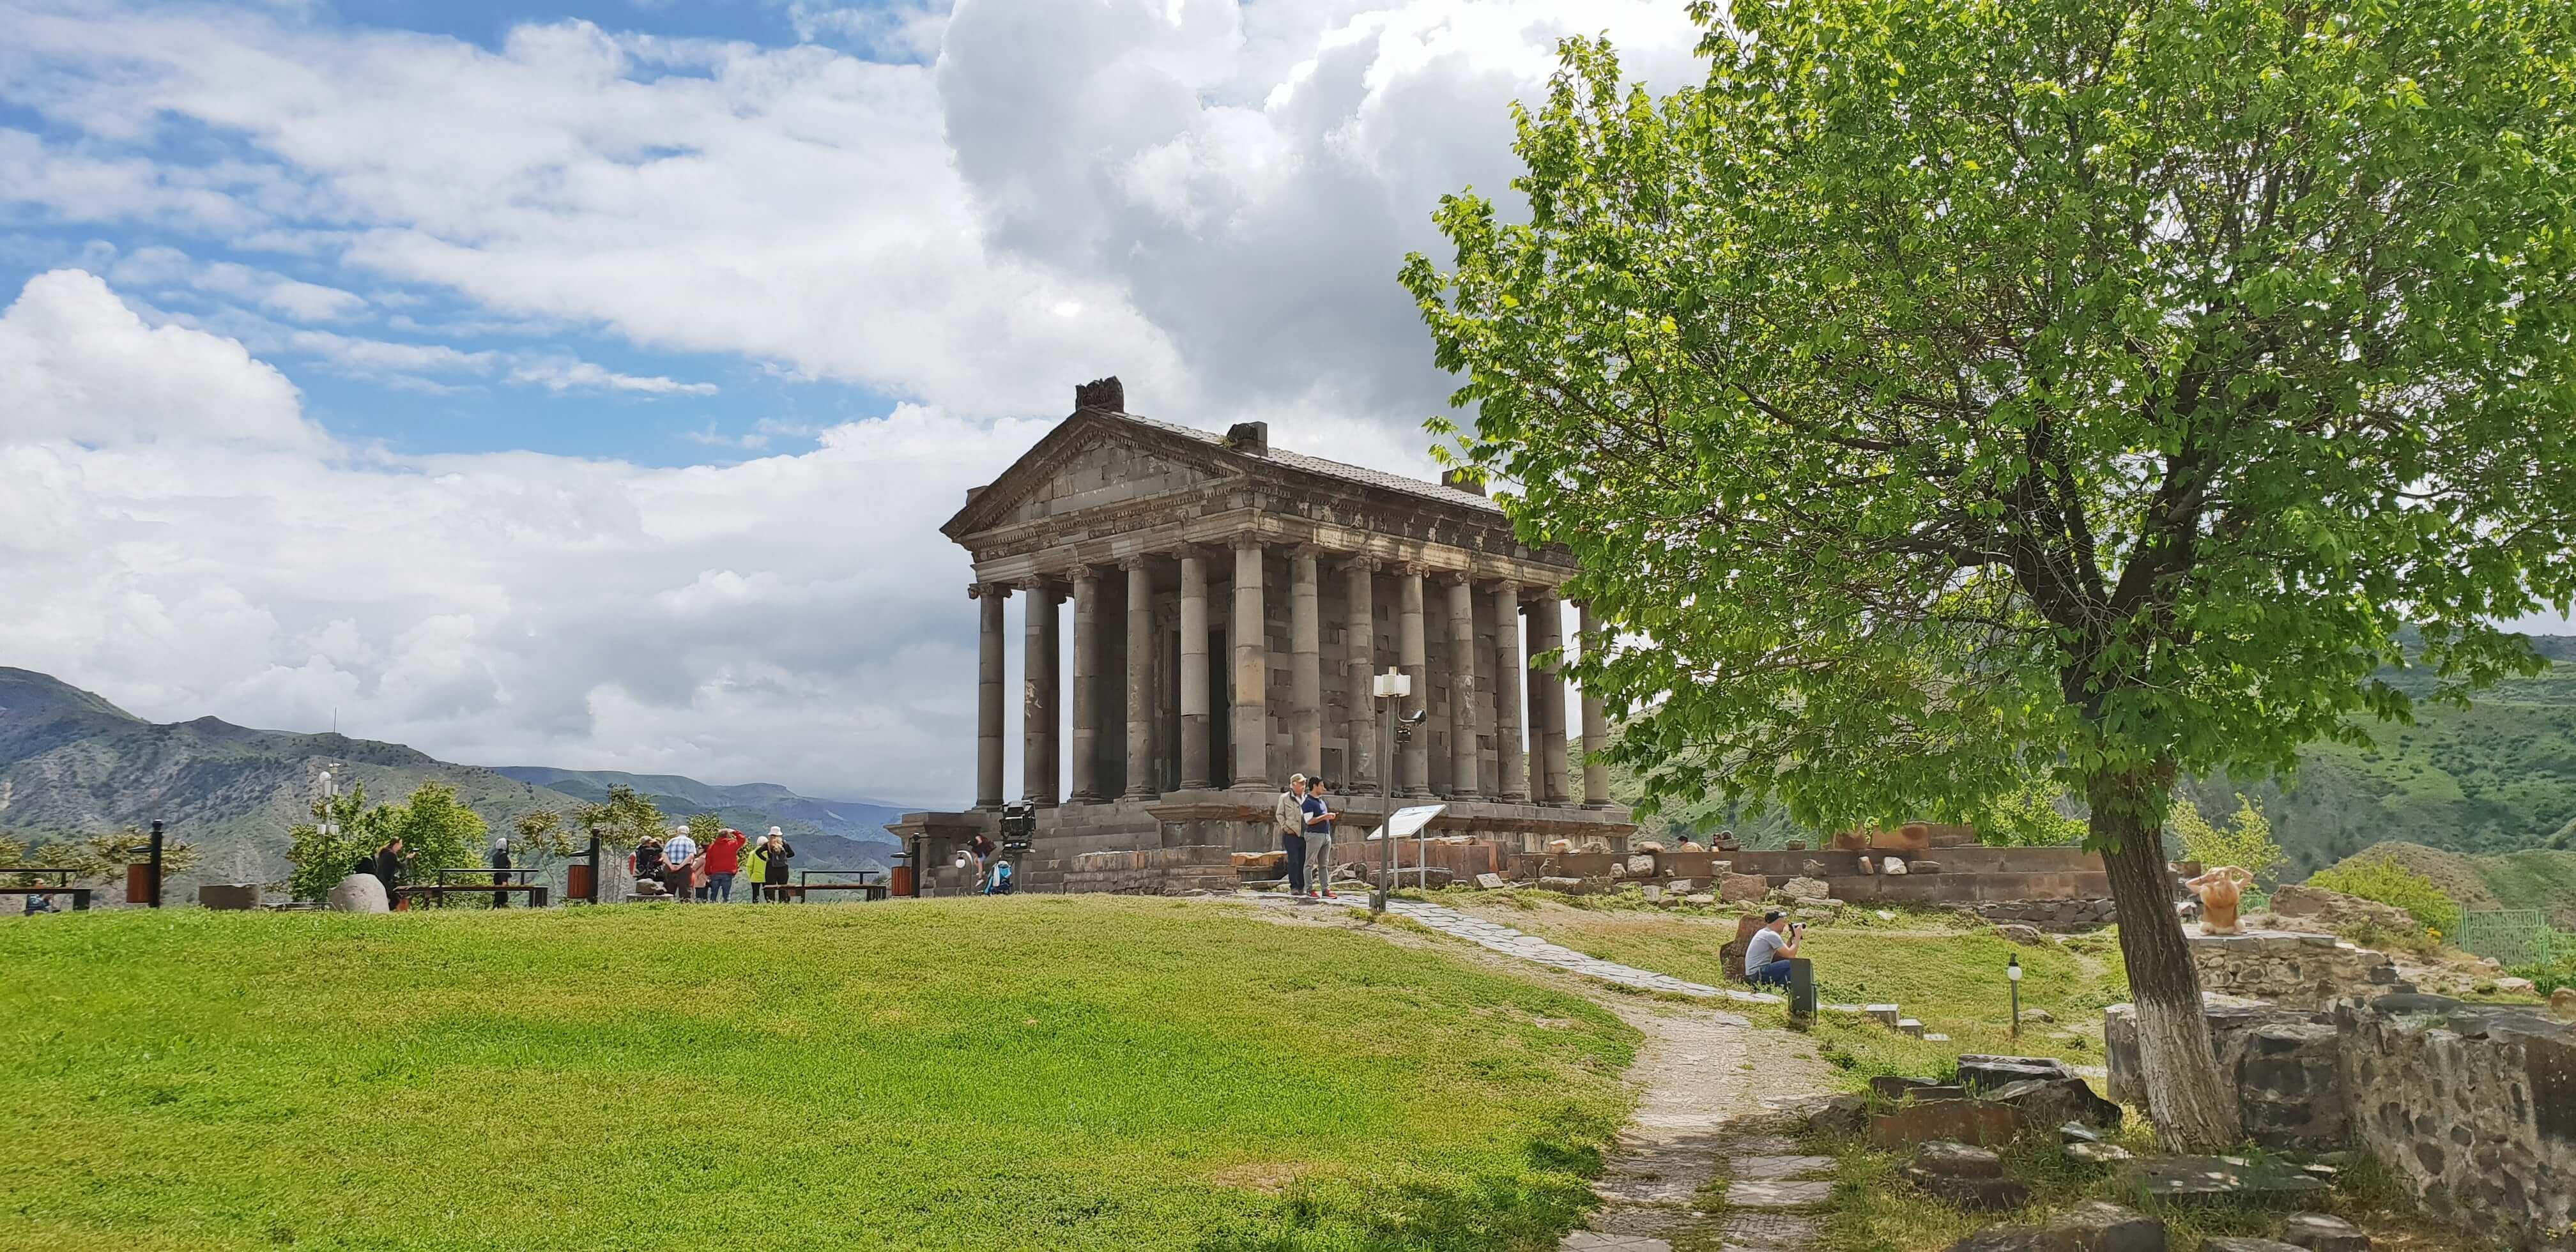 Garni temple is the only non-Christian entity in Armenia